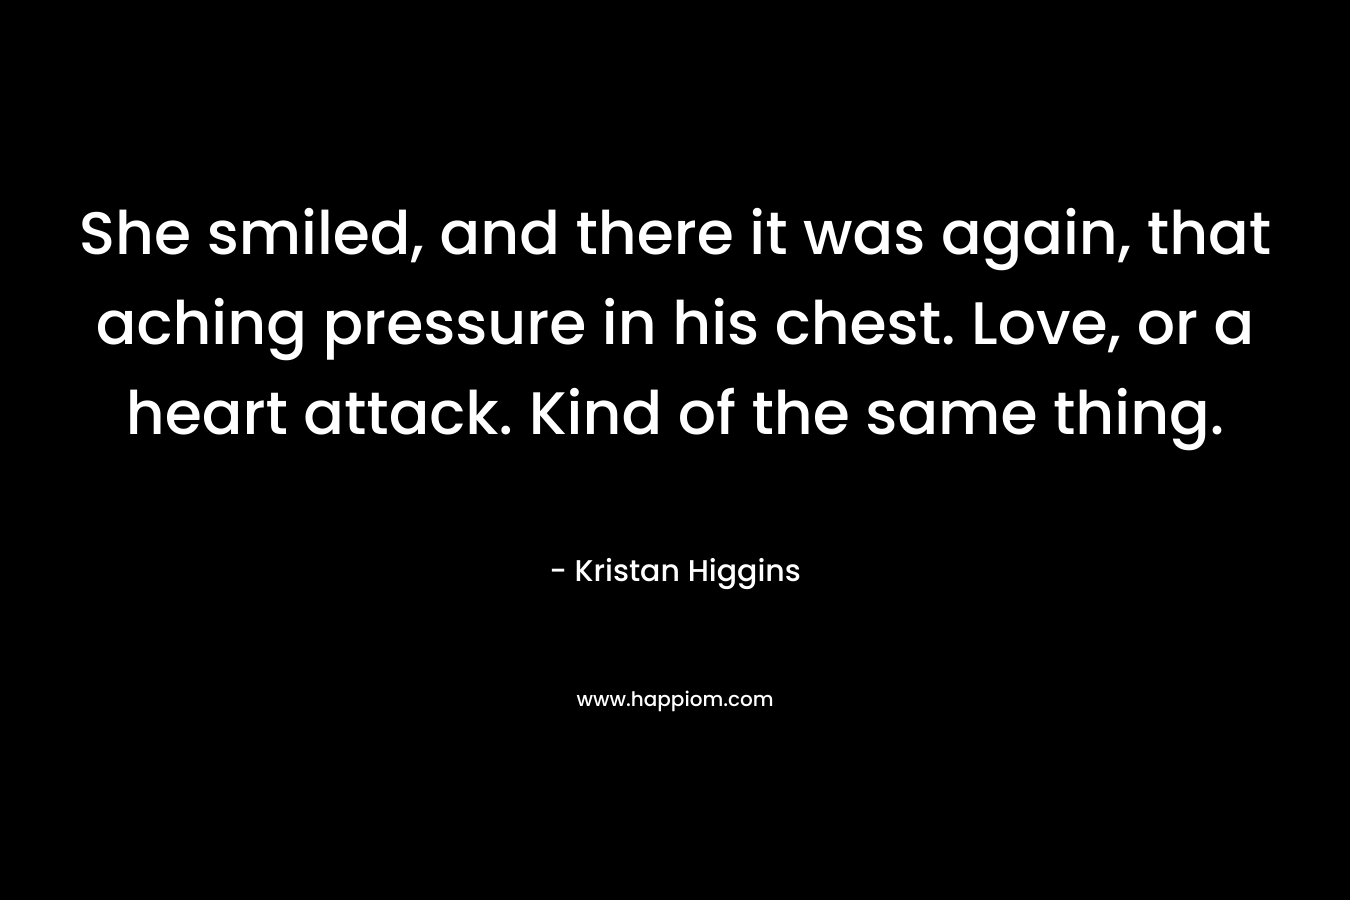 She smiled, and there it was again, that aching pressure in his chest. Love, or a heart attack. Kind of the same thing. – Kristan Higgins